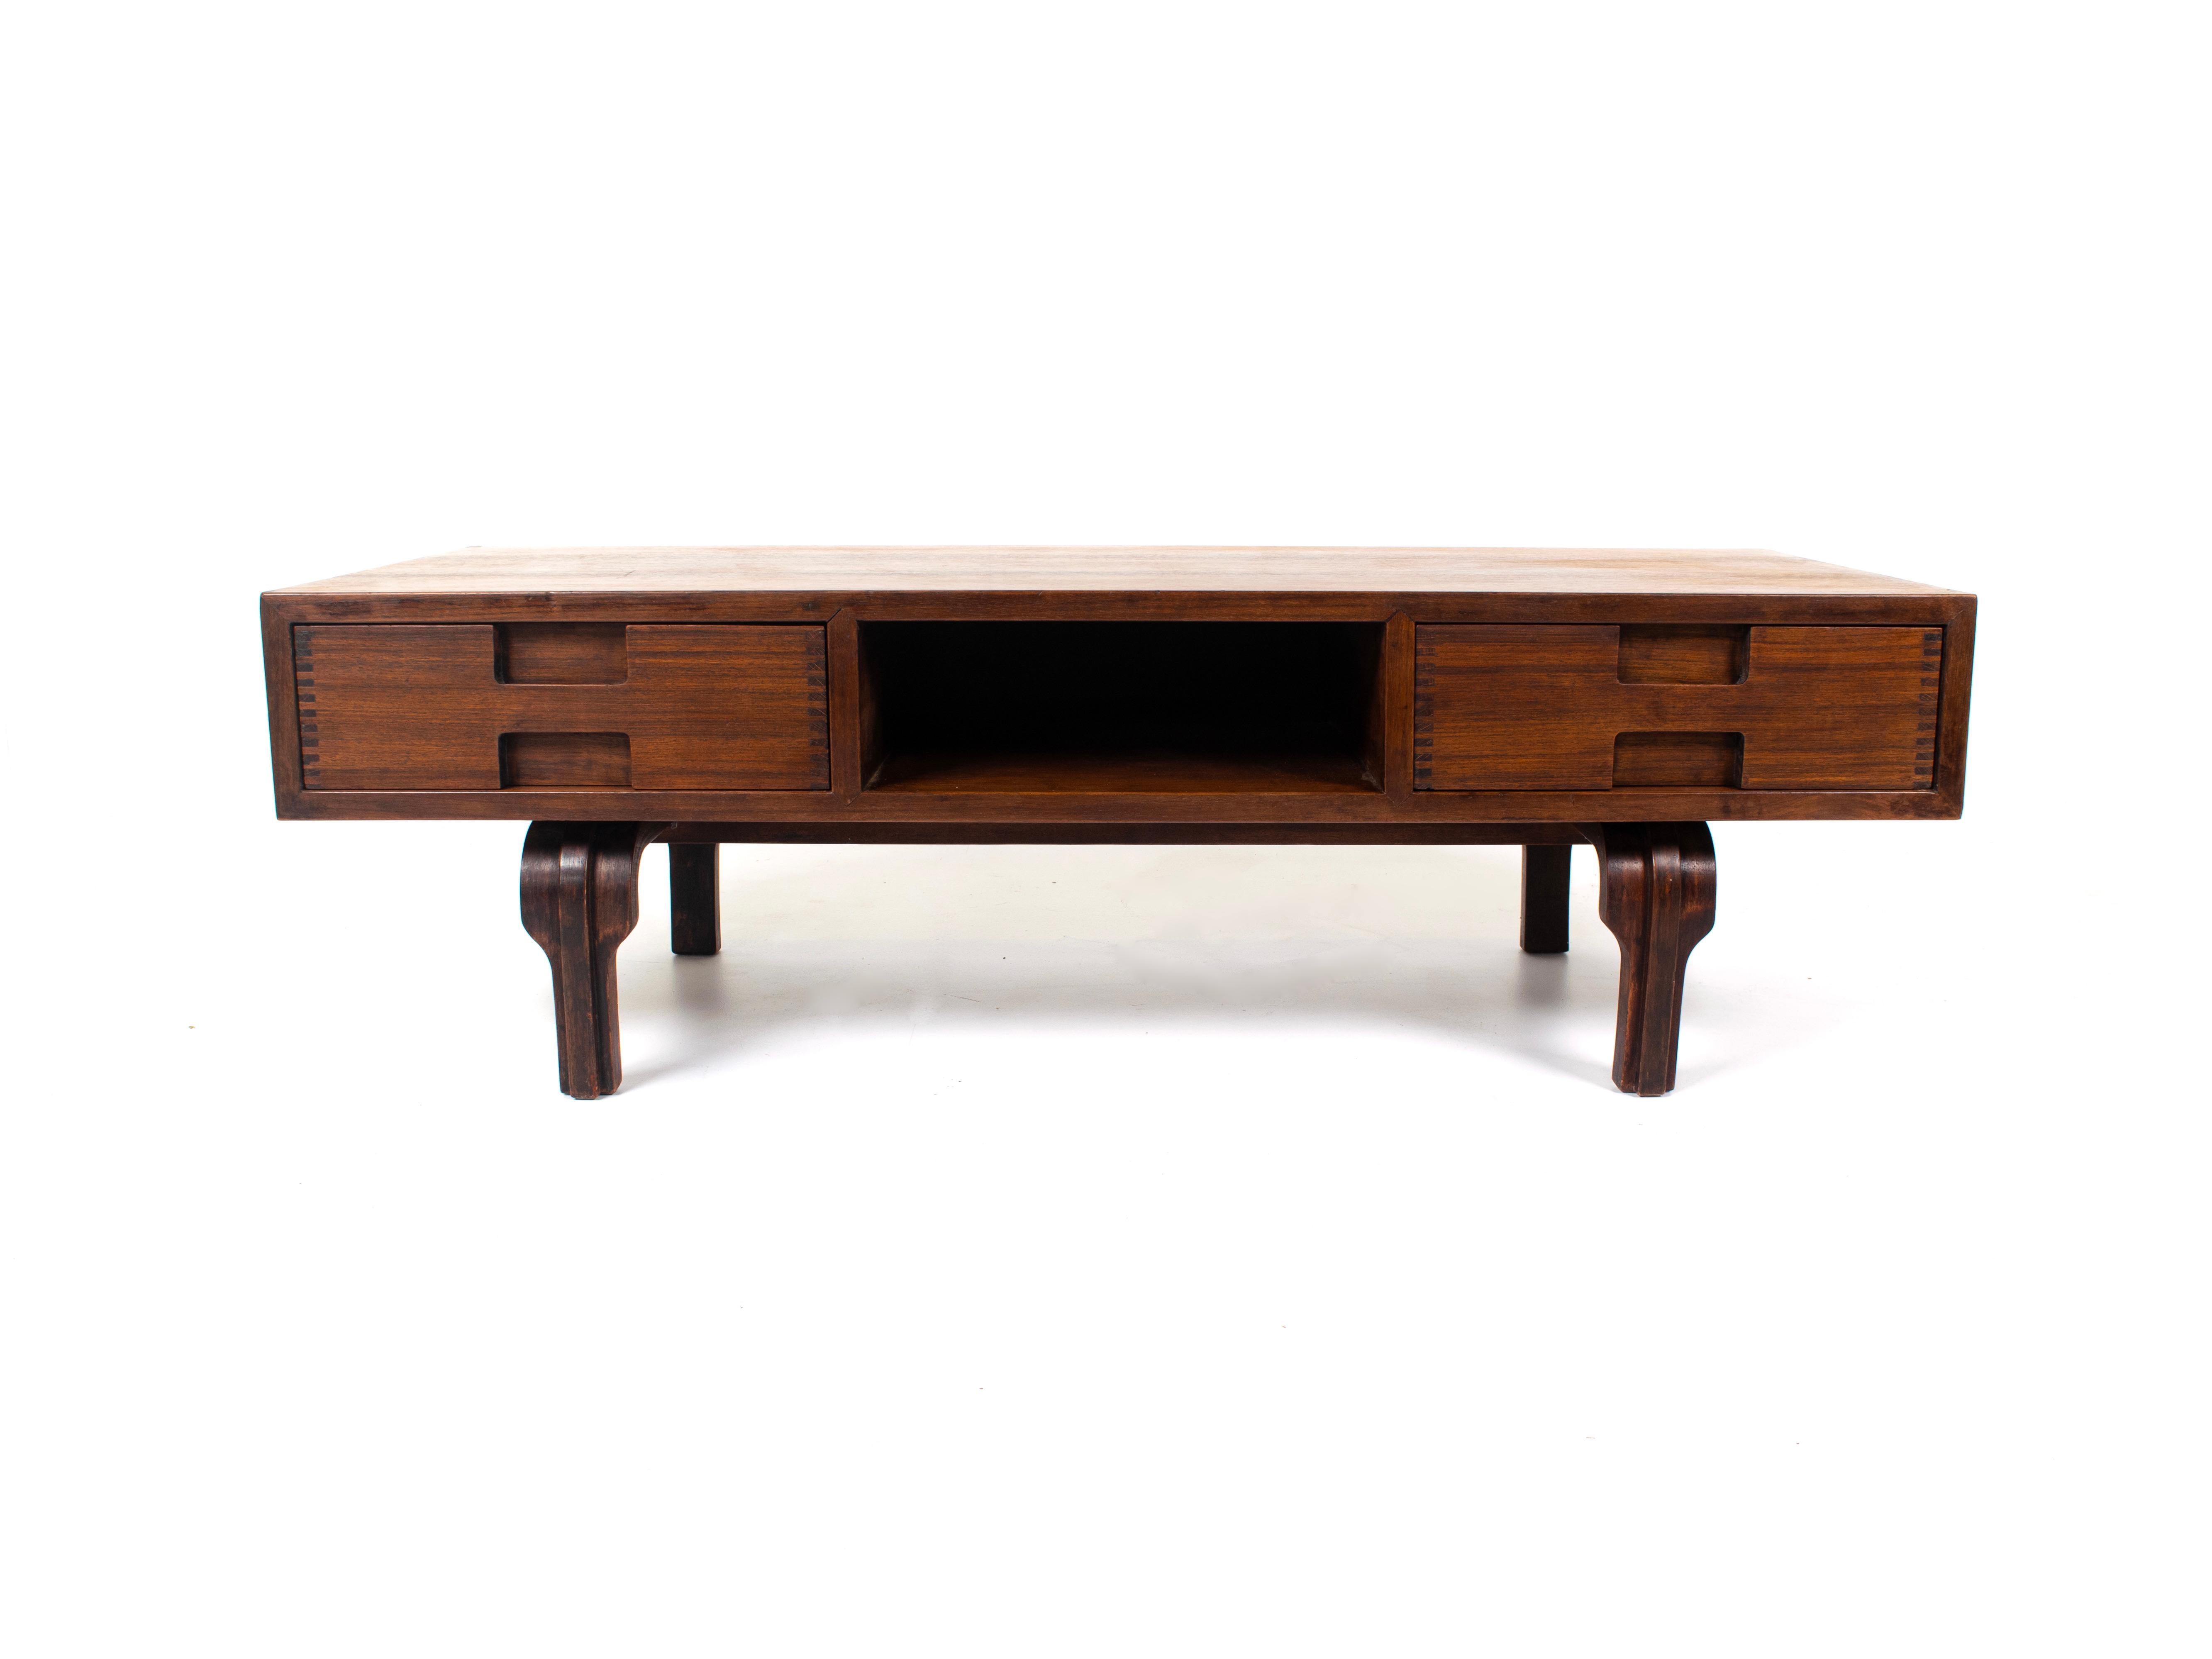 Italian coffee table attributed to Gianfranco Frattini, 1960s. This amazing coffee table has a drawer on each side with in the middle a shelve. It has a minimalistic design, with the feet of the table being the eyecatcher. The four feet have an